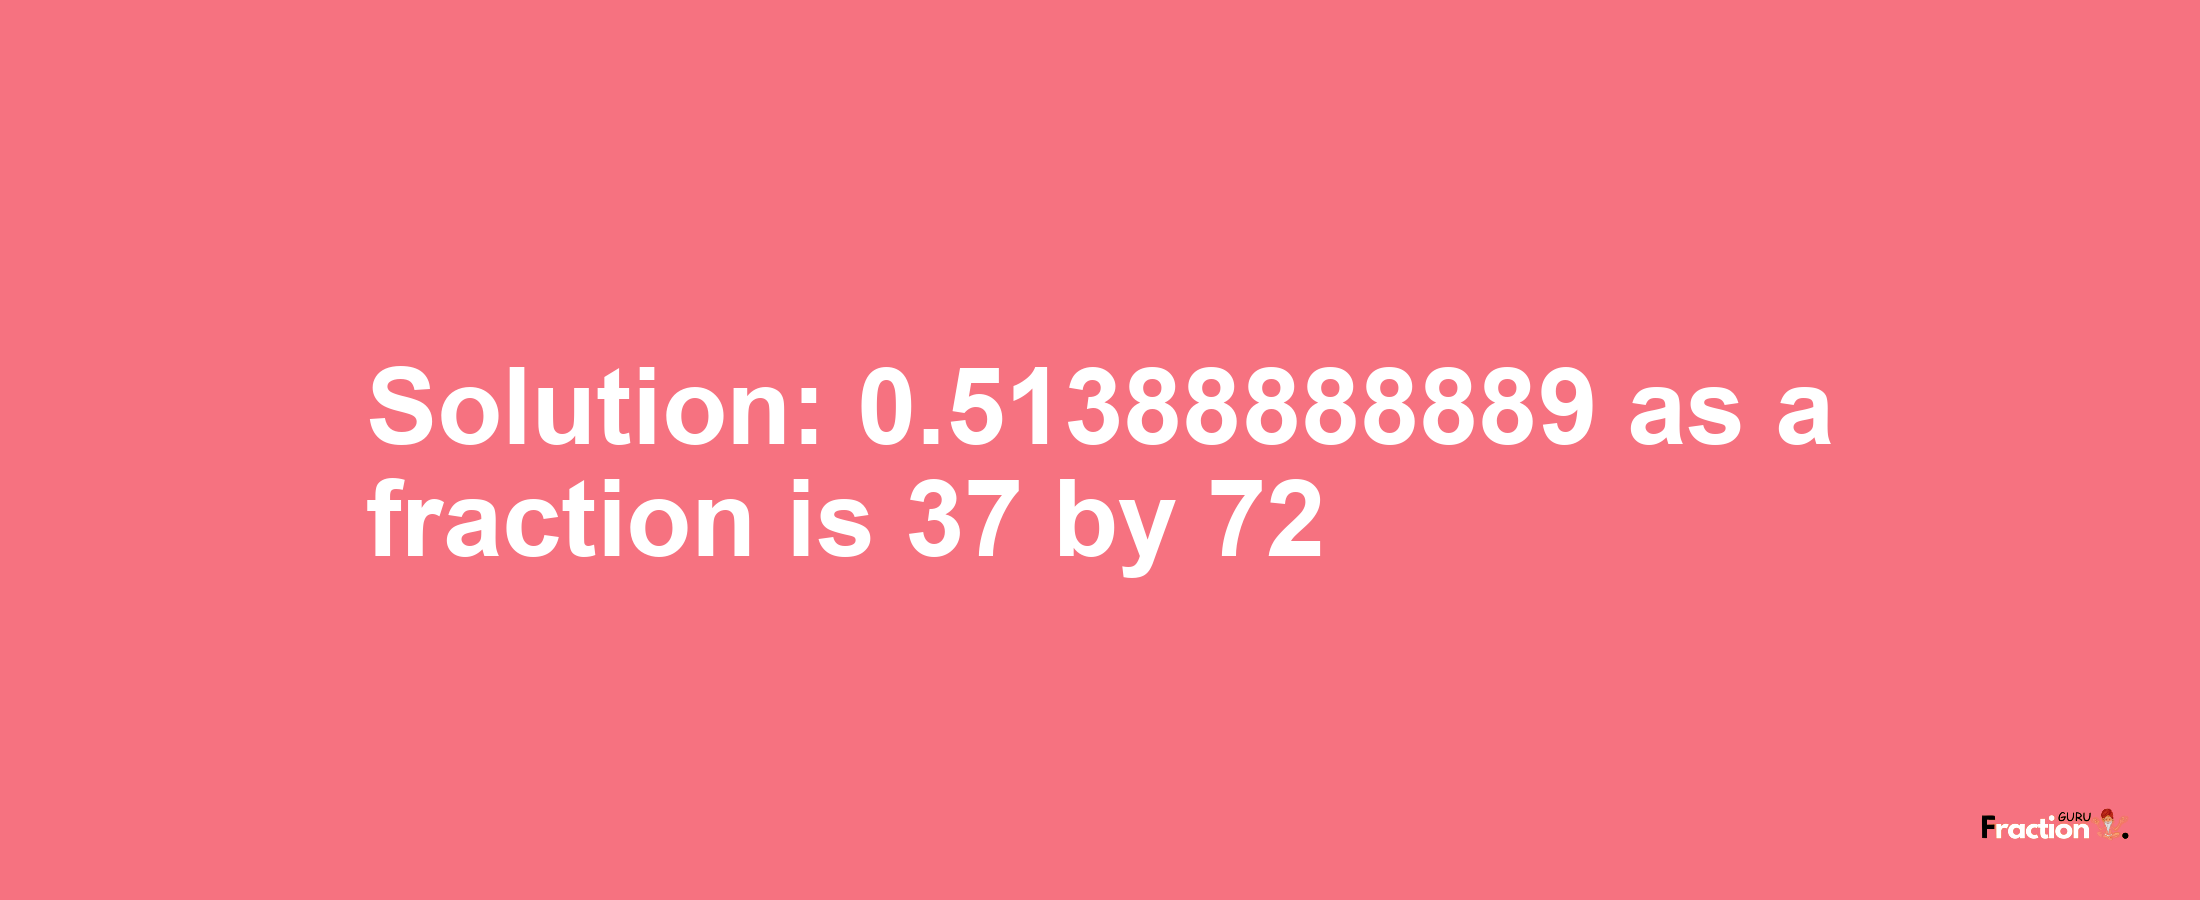 Solution:0.51388888889 as a fraction is 37/72